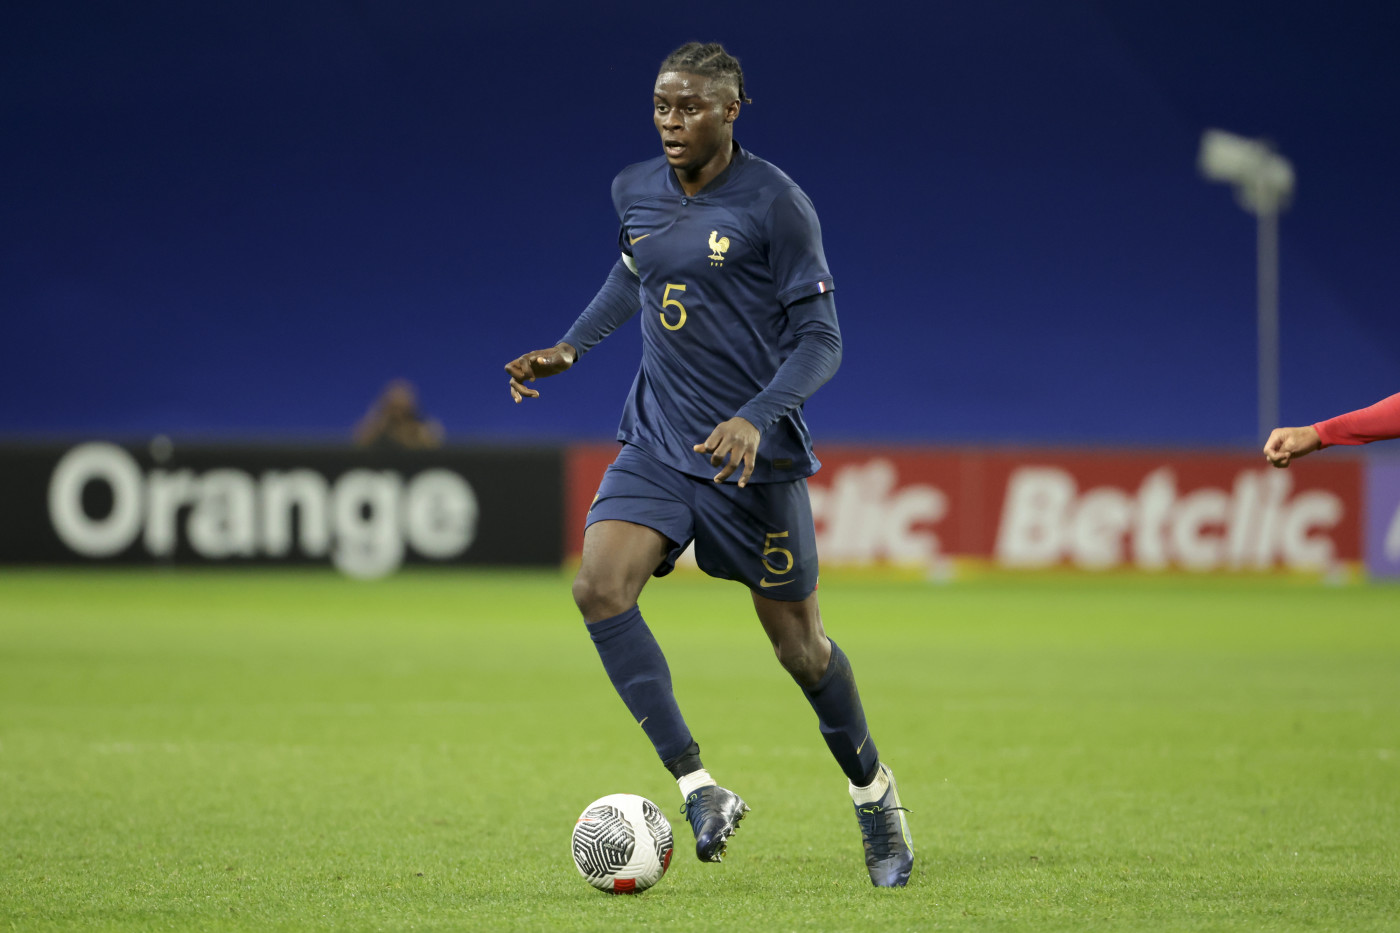 Lesley Ugochukwu has been named in France's provisional Olympic squad